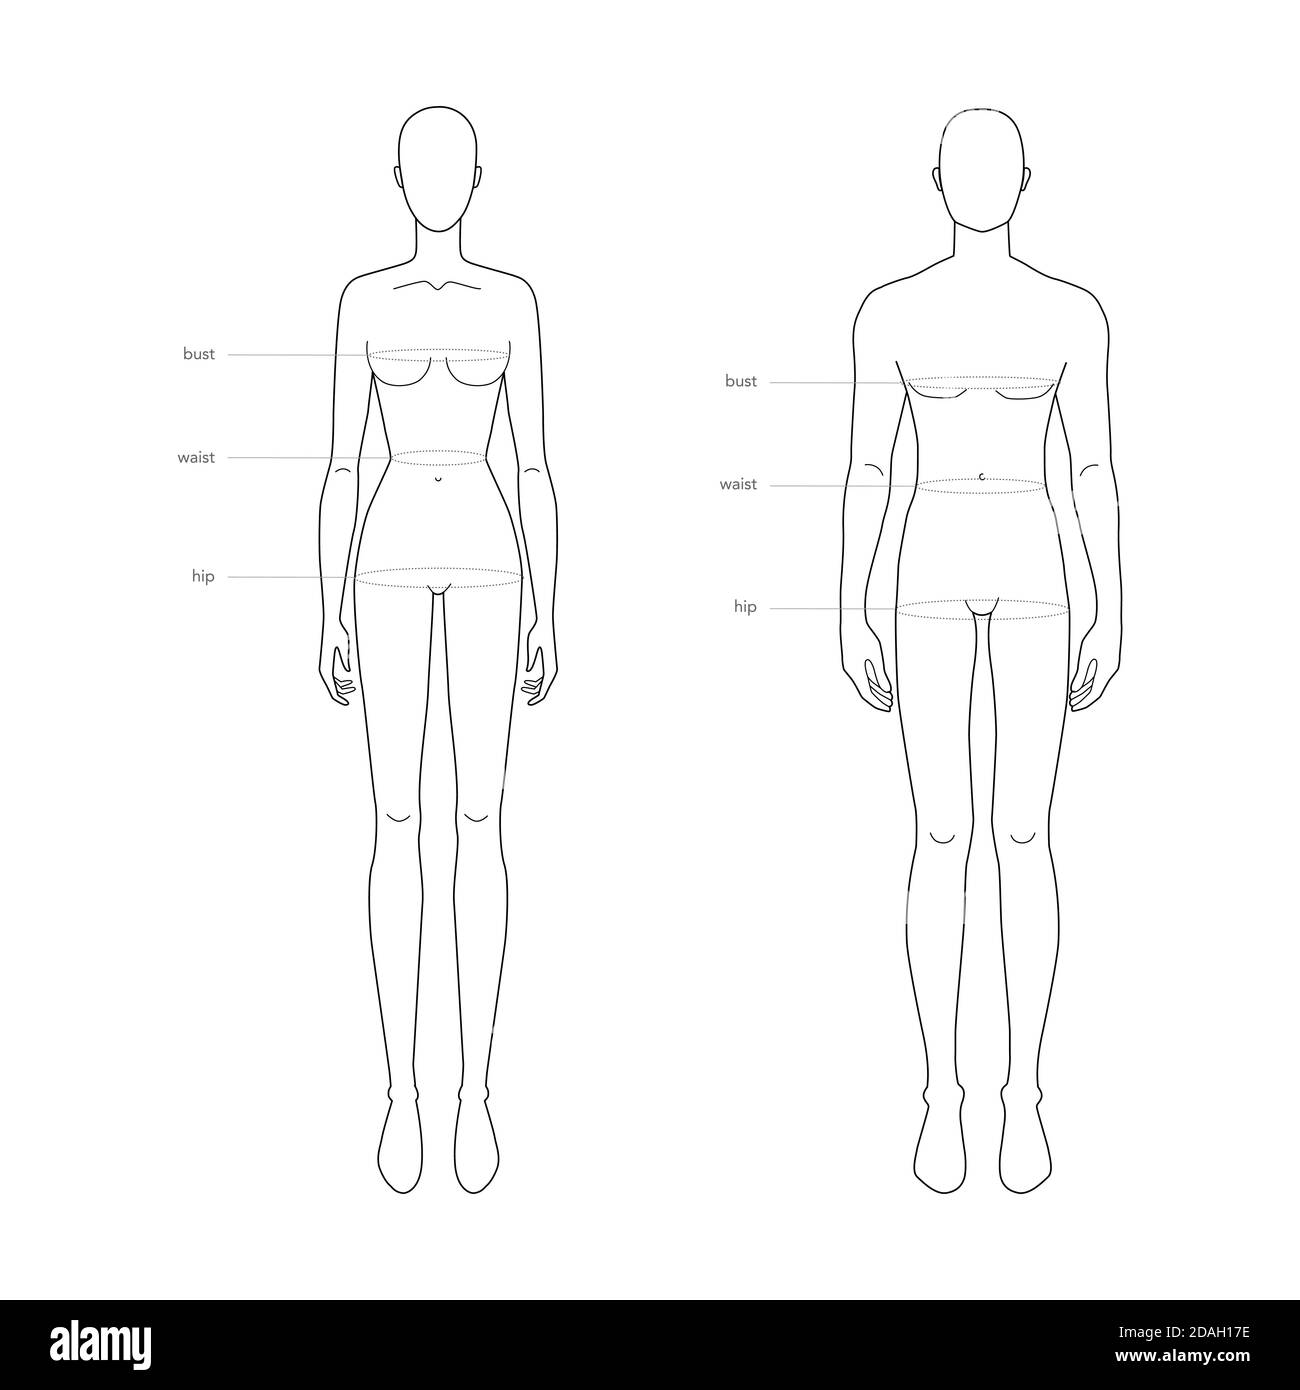 Men and women body parts terminology measurements Illustration for